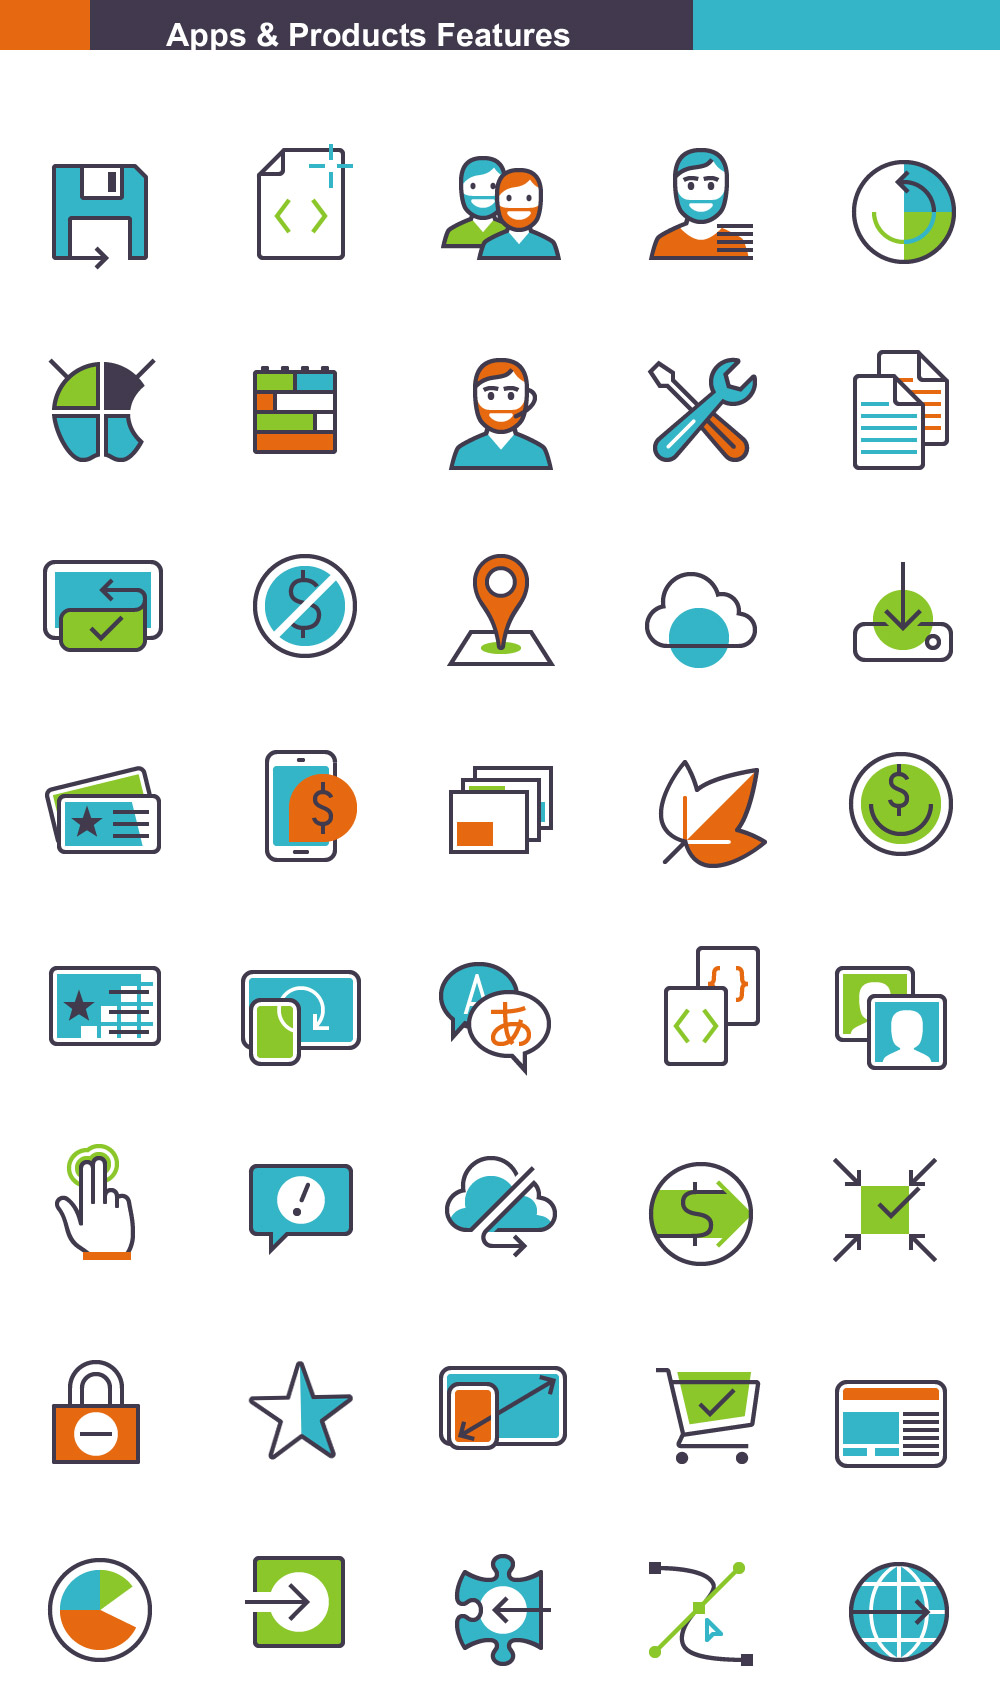 Free Apps & Products Vector Icons